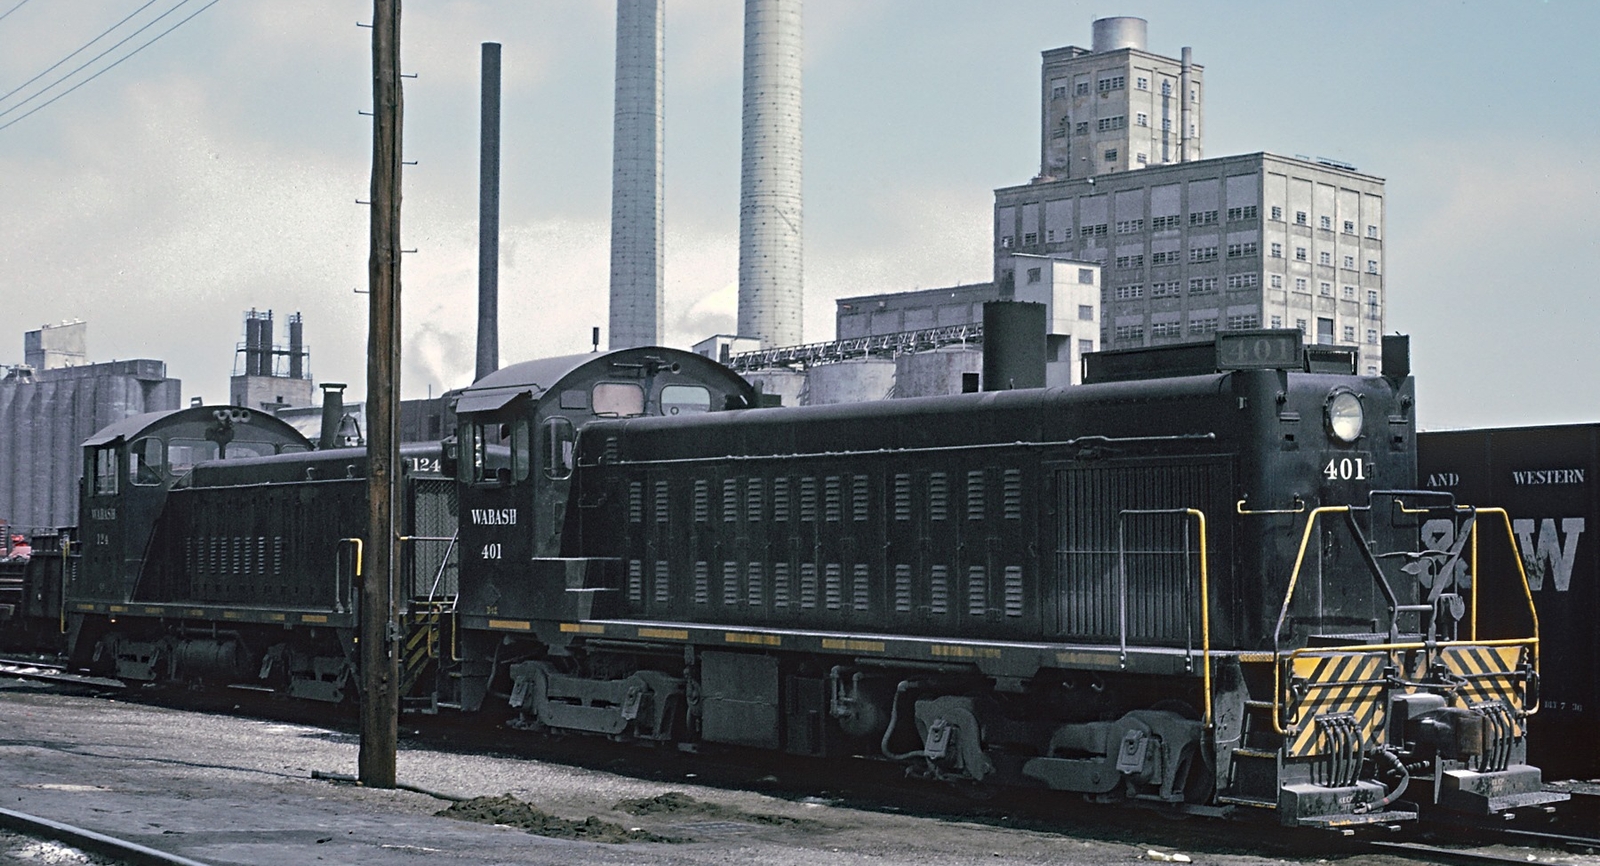 Wabash LS-1200 No. 401 in May 1966 at Decatur, Illinois